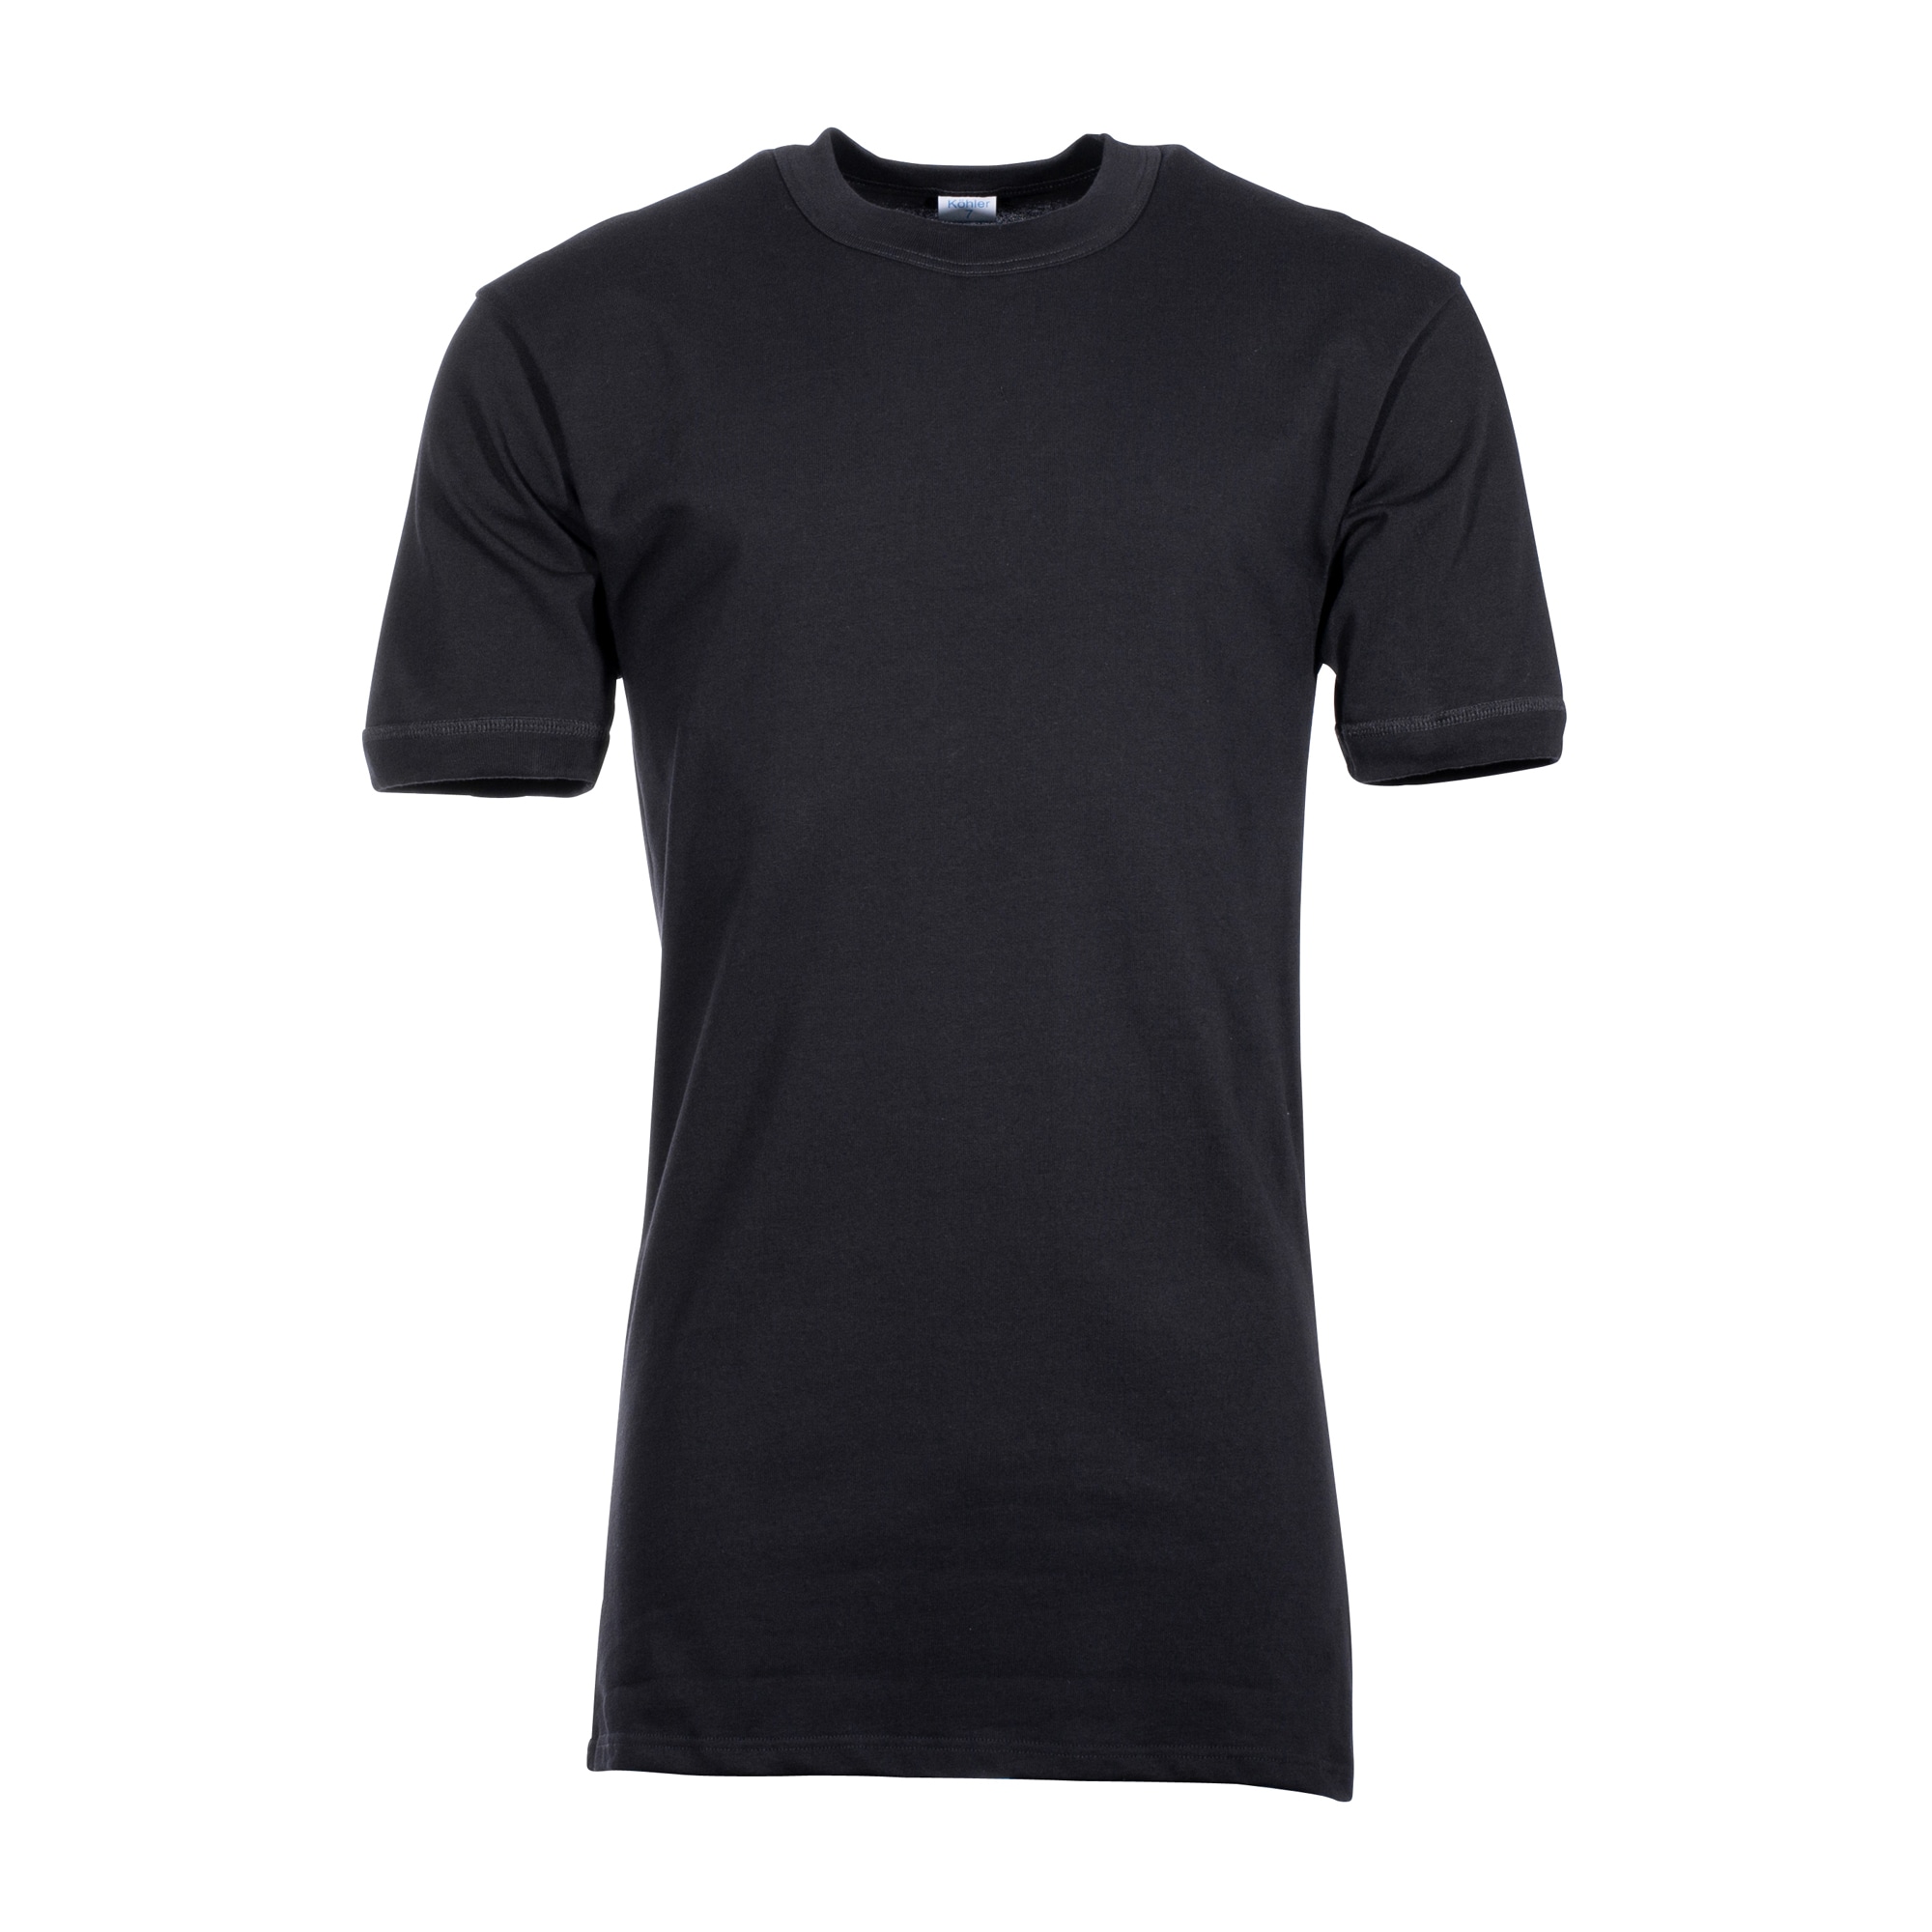 Purchase the German Military T-Shirt TL black by ASMC